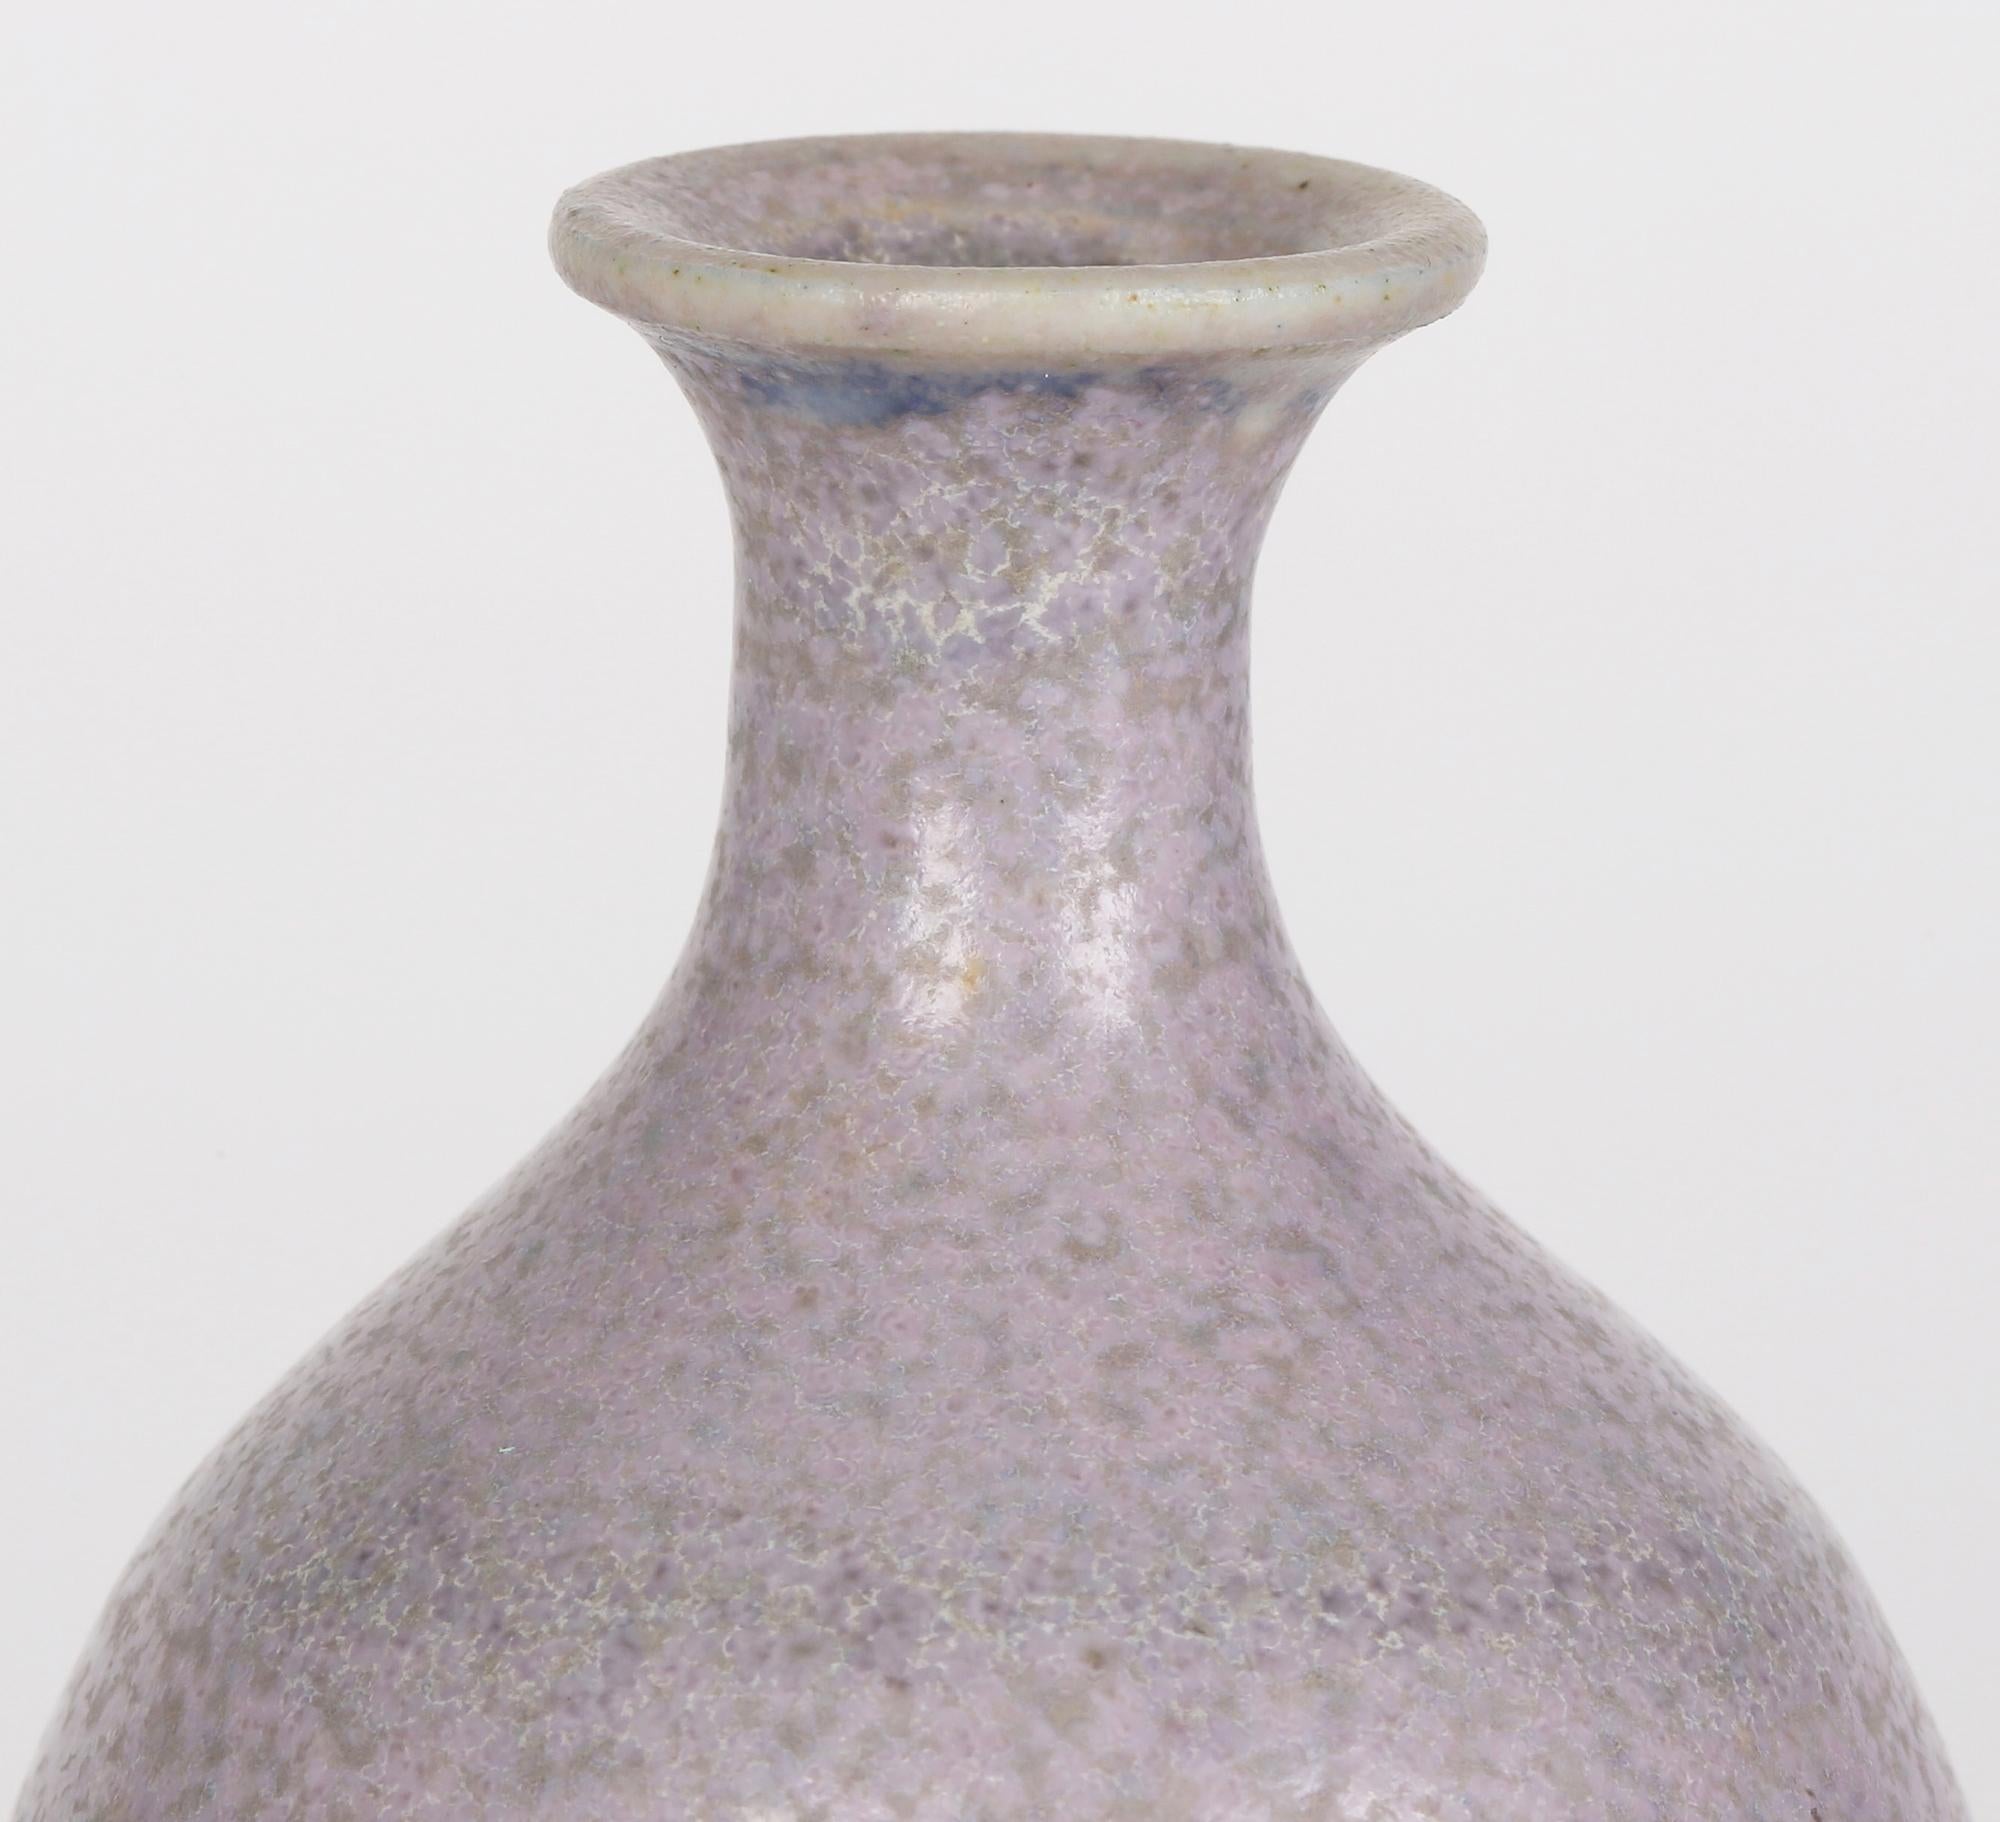 A very fine quality studio porcelain vase decorated in satin lavender hares fur glazes signed ST and in the style of Berndt Friberg dating from the 20th century. The small sized tall bulbous shaped vase stands on a narrow round rim with slightly